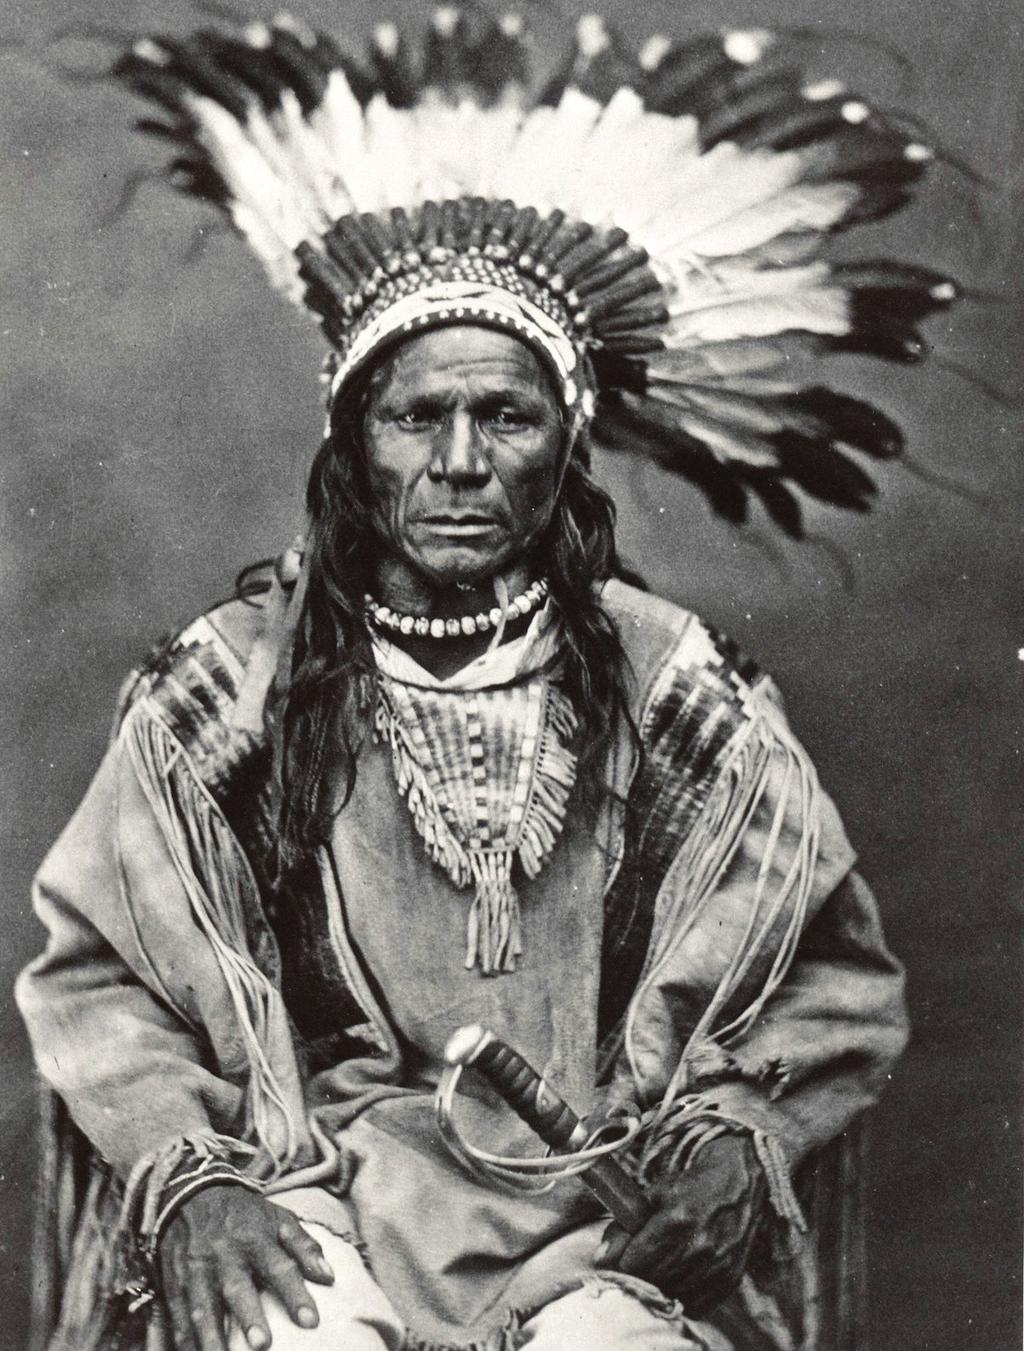 Chapter 9 Crow-Flies-High Resists the Reservation Notes 95 Crow-Flies-High Three Tribes Museum Calvin Grinnell Mandan-Hidatsa The Crow Flies High band in the from about 1869/1870 to 1894 refused the